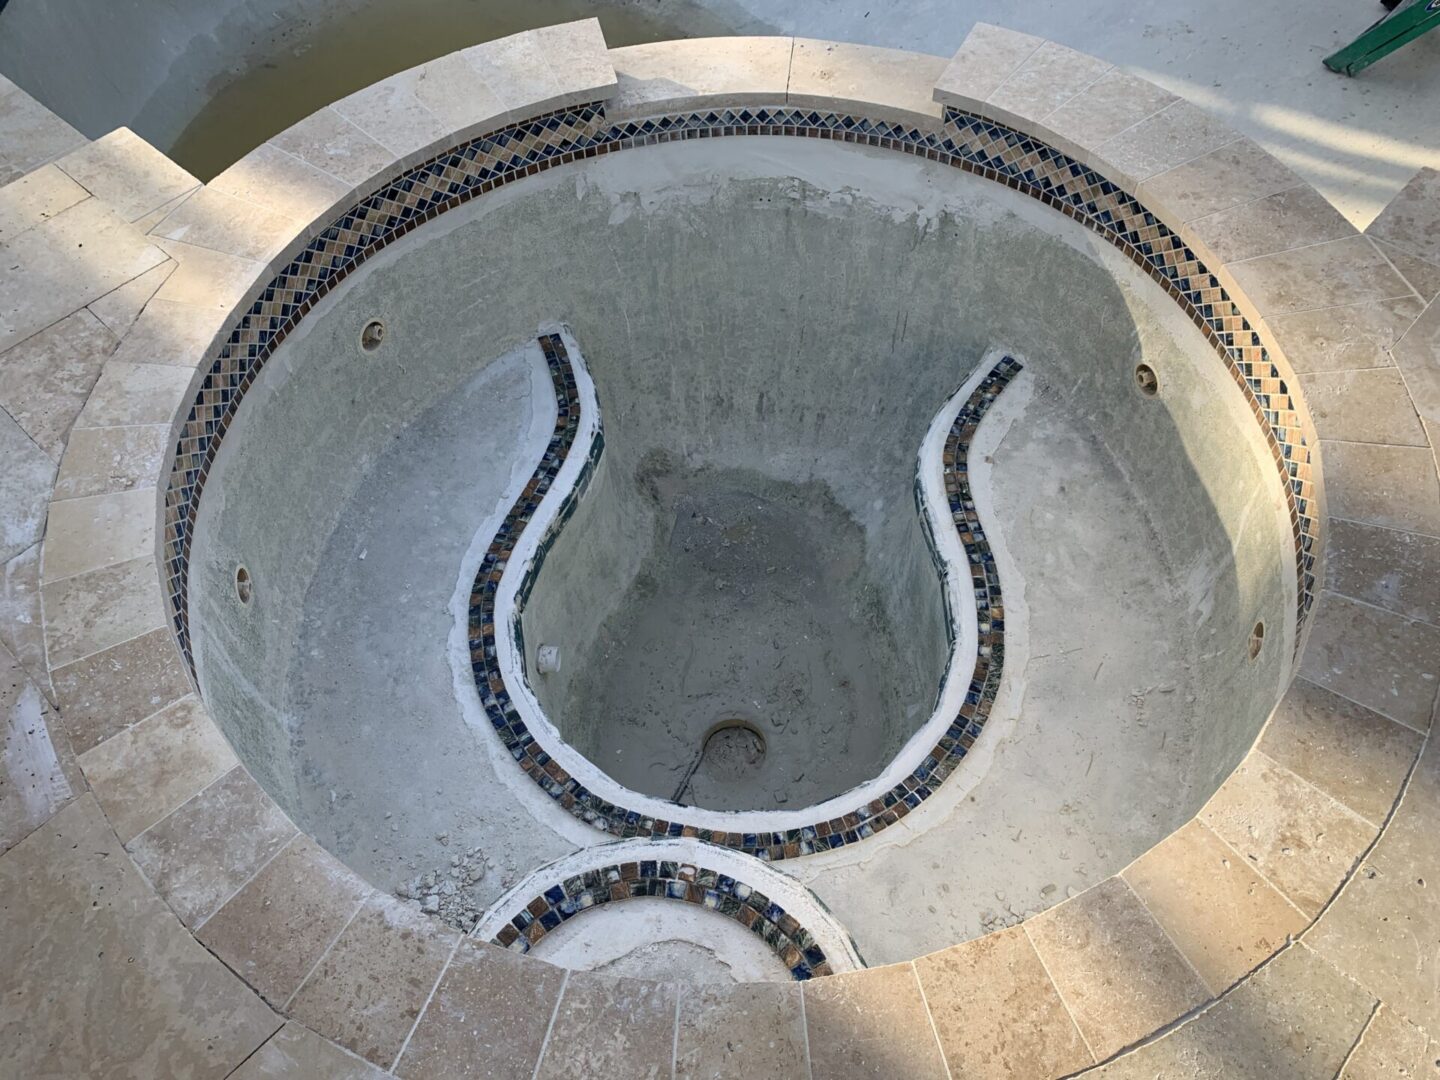 A drained circular spa under construction, featuring tiled edges and a curved, stepped interior design.